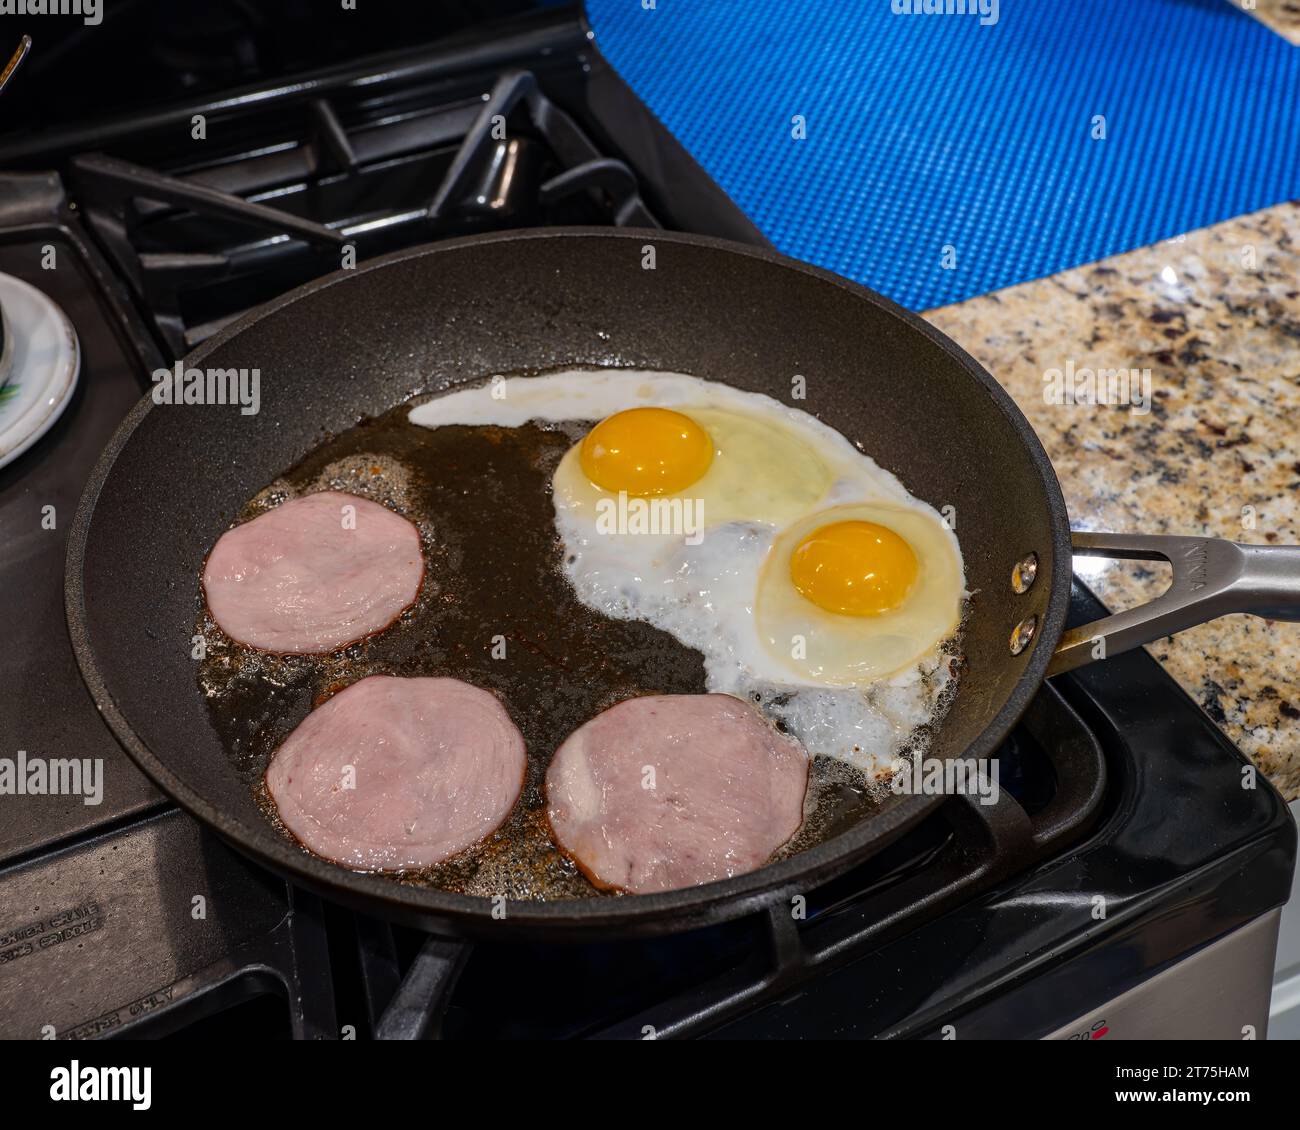 Fried or frying eggs with Canadian bacon in a skillet in home kitchen on gas stove top, a typical American breakfast. Stock Photo